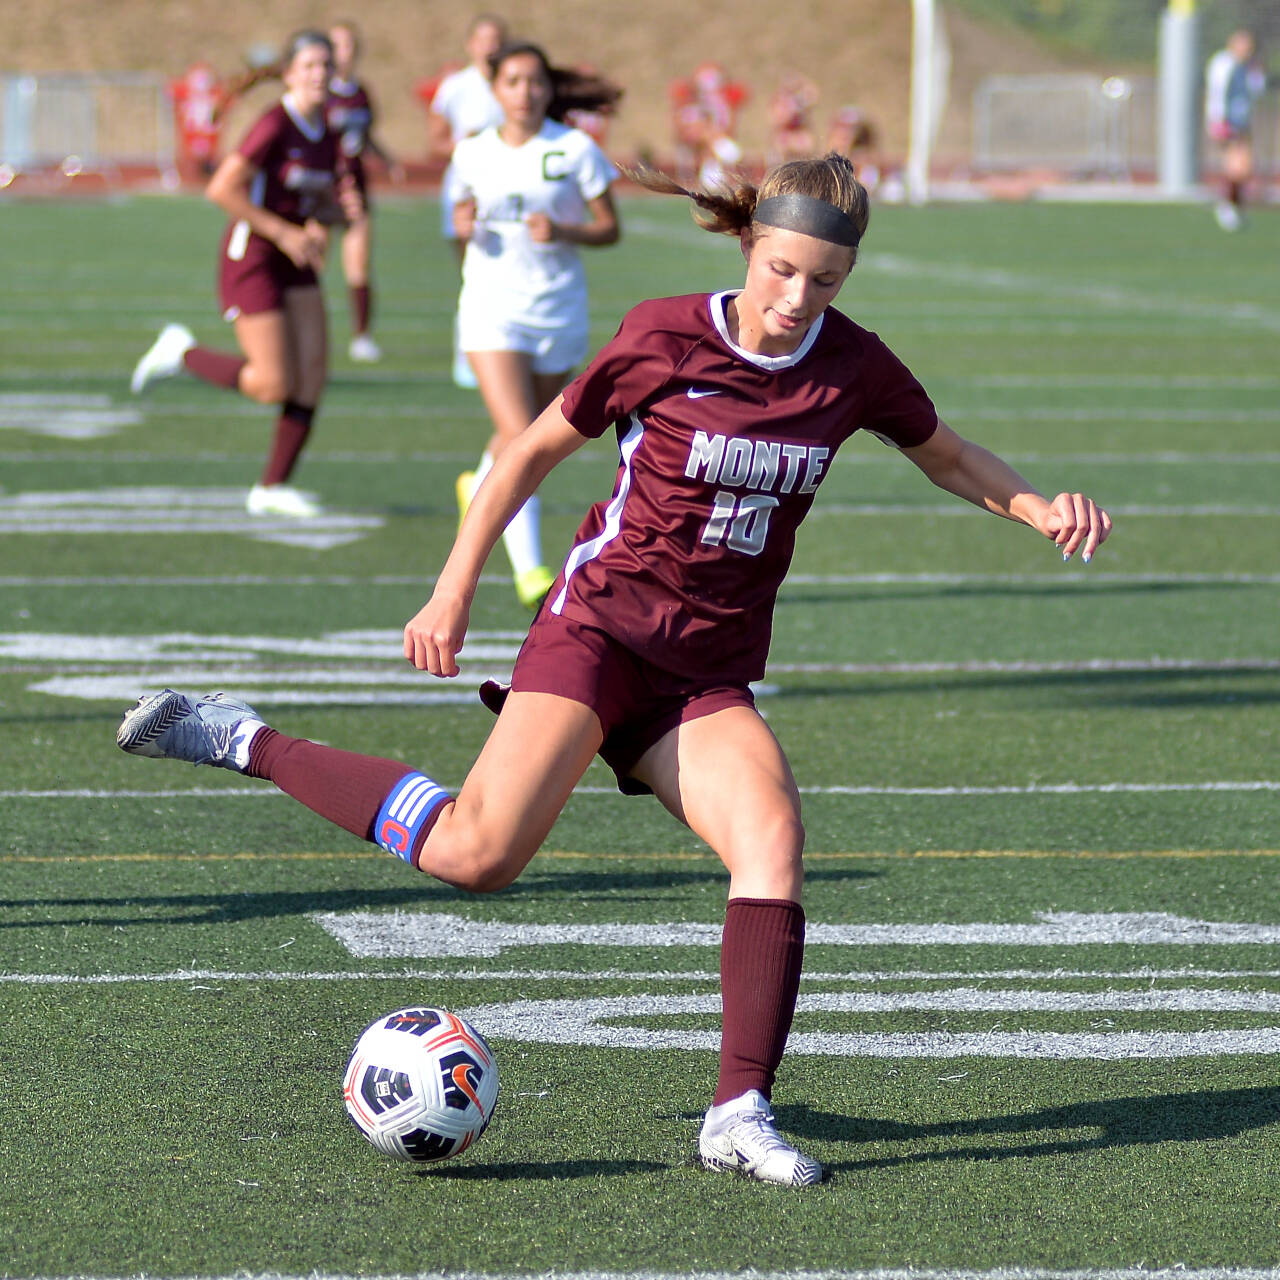 DAILY WORLD FILE PHOTO
 Montesano junior forward Mikayla Stanfield was named the 1A Evergreen League MVP for the second consecutive season after scoring 19 goals this season for the league champion Bulldogs.